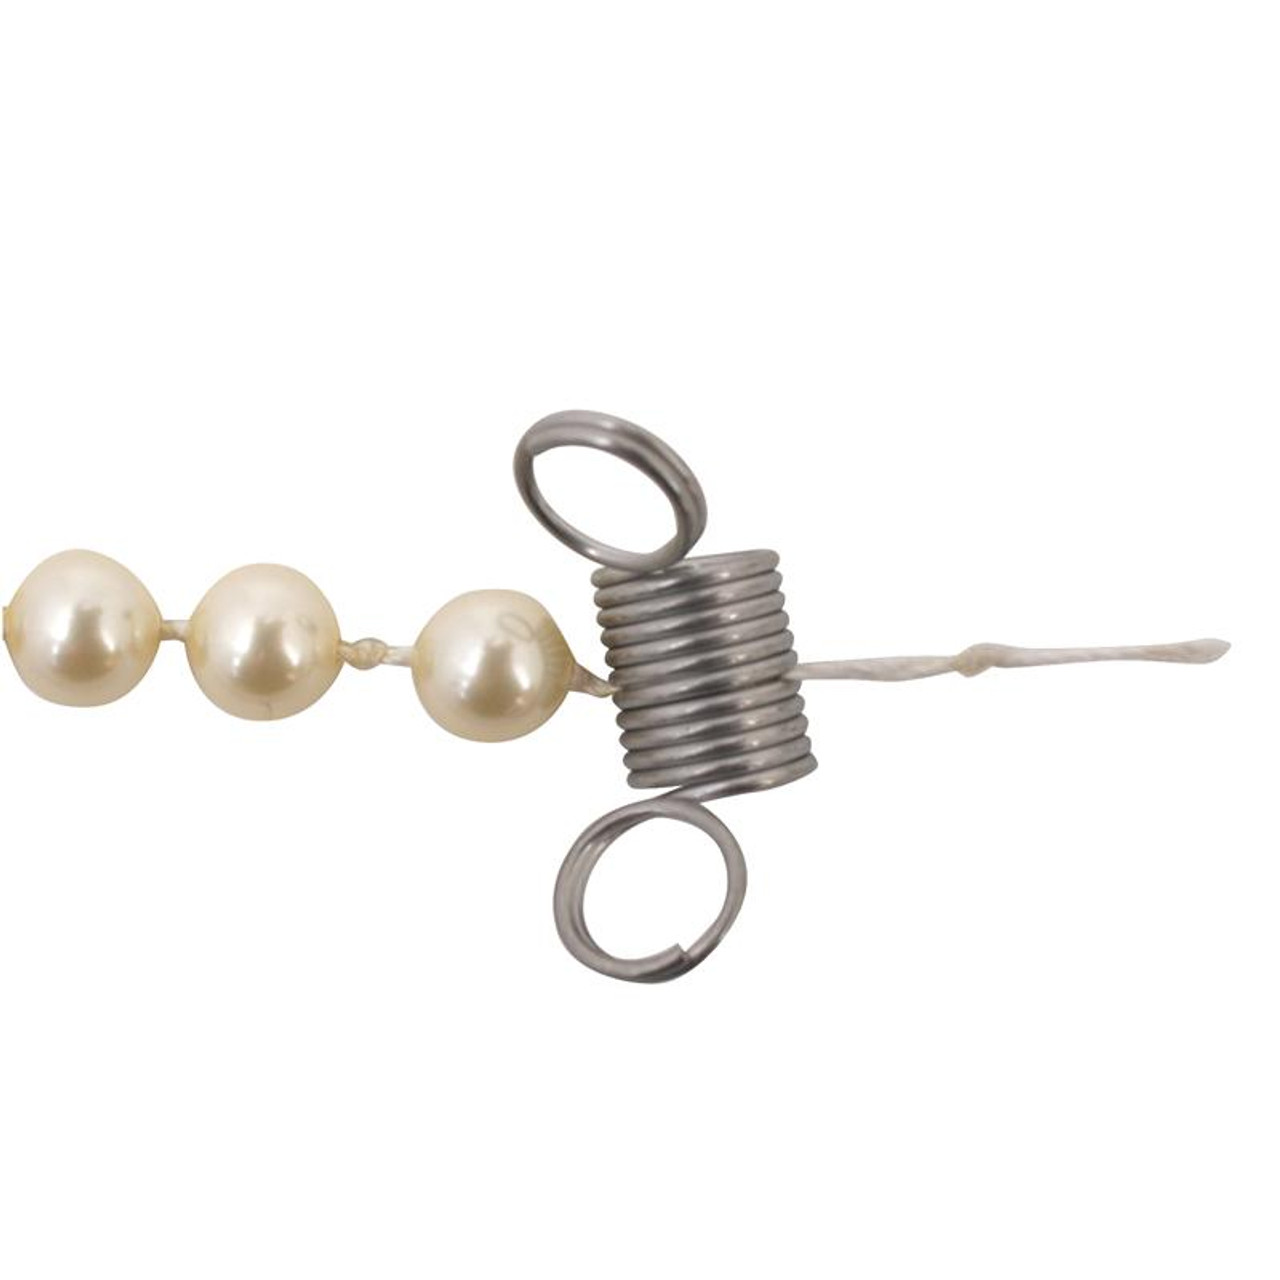 2 Small Bead Stoppers for Stringing Beads Jewellery Threading